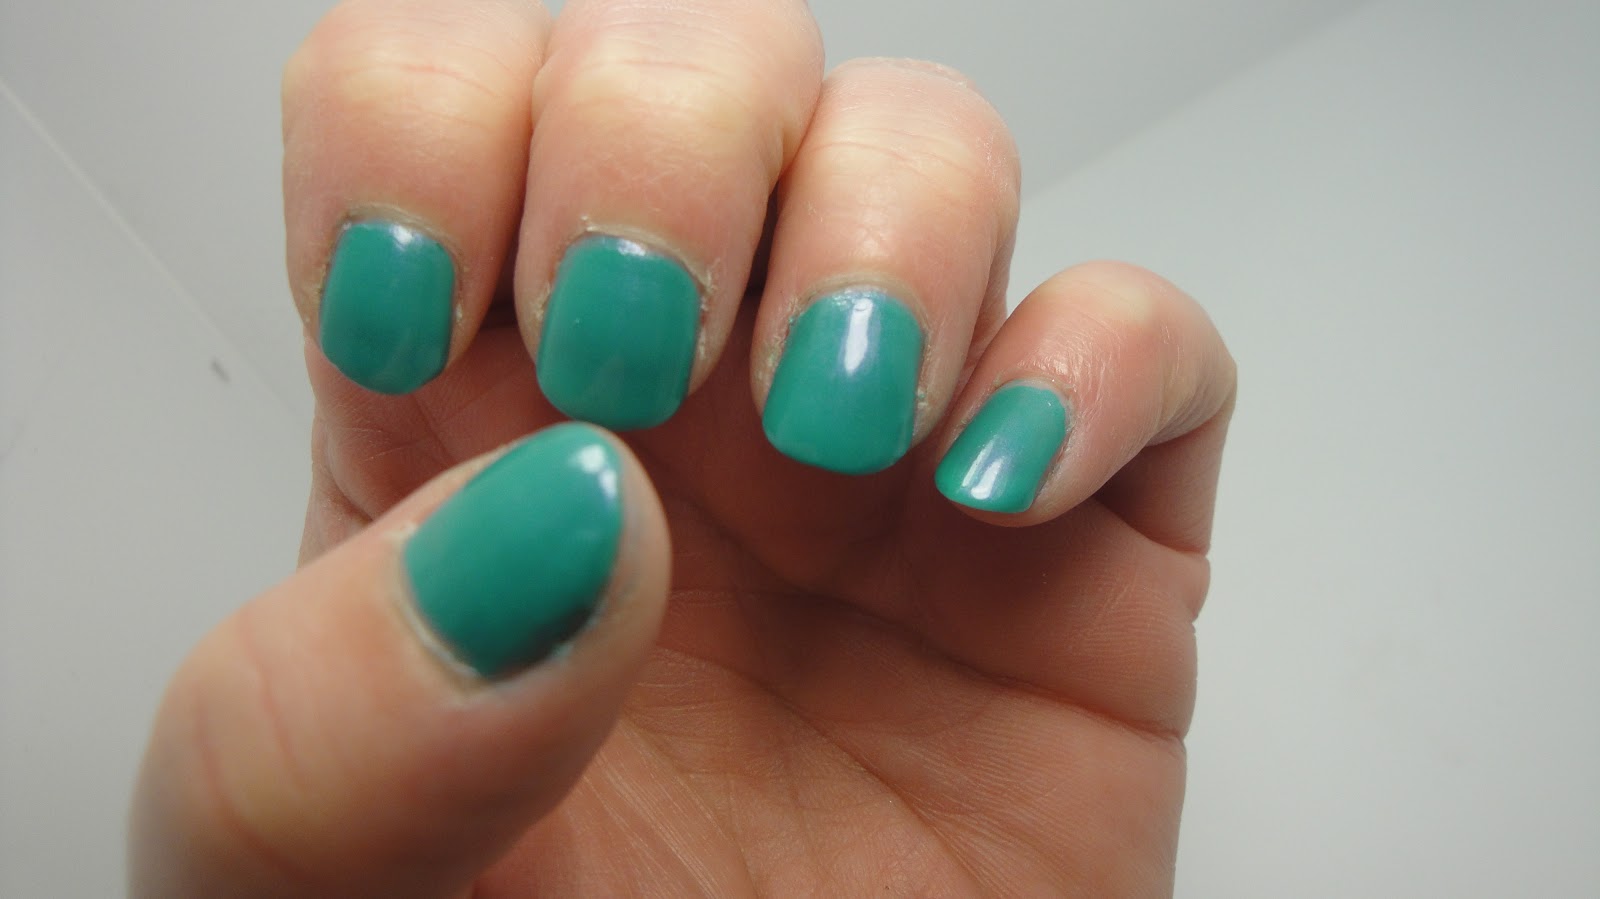 Jayded Dreaming Beauty Blog : NOTD - RESCUE BEAUTY LOUNGE AQUA LILY